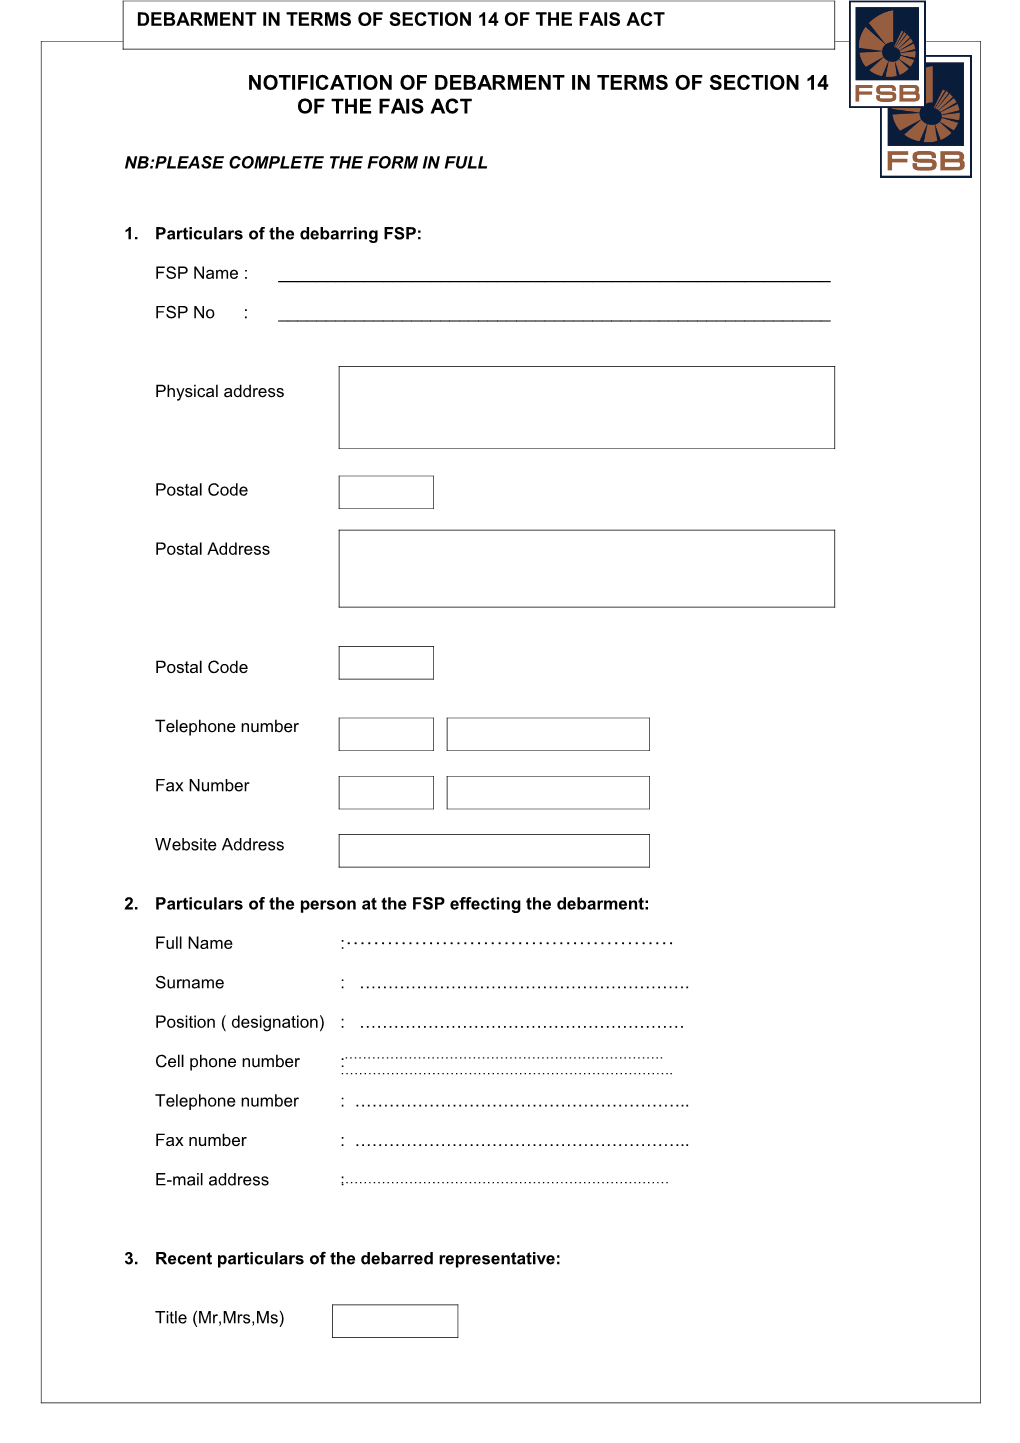 Nb:Please Complete the Form in Full